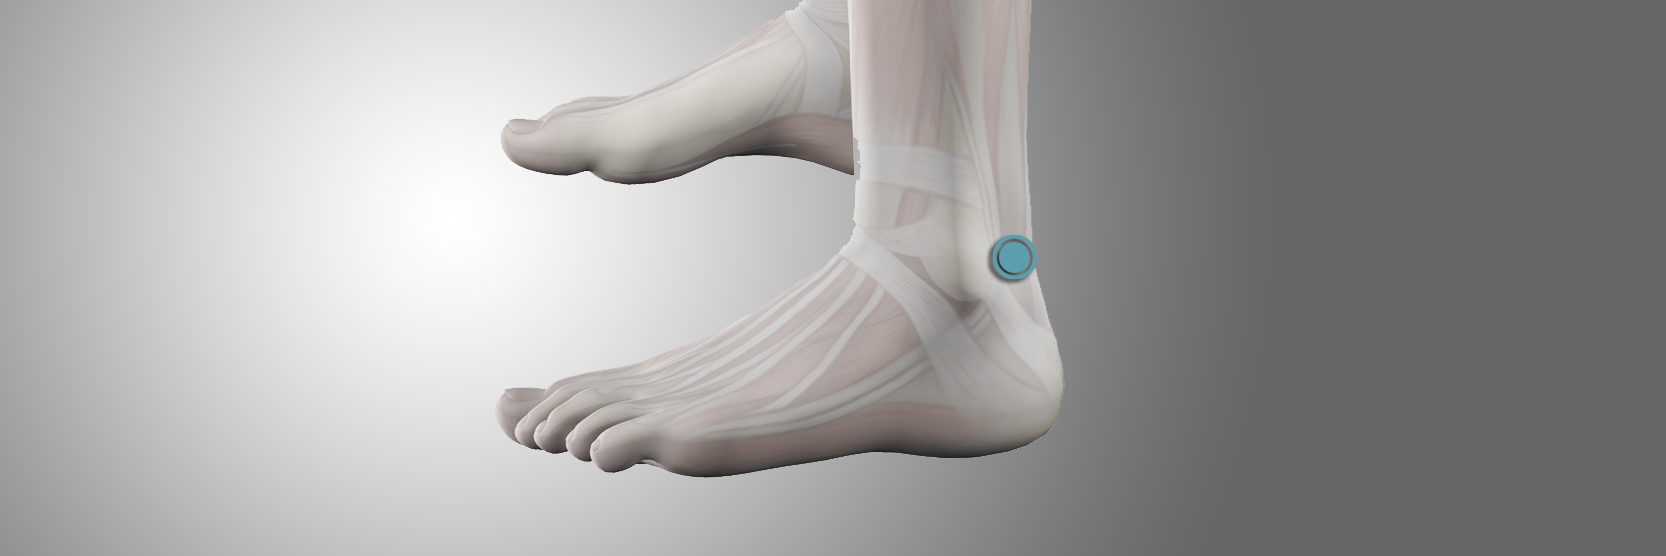 Heel Pain, Heel Spurs and Plantar Fasciitis - Podiatry of Greater Cleveland